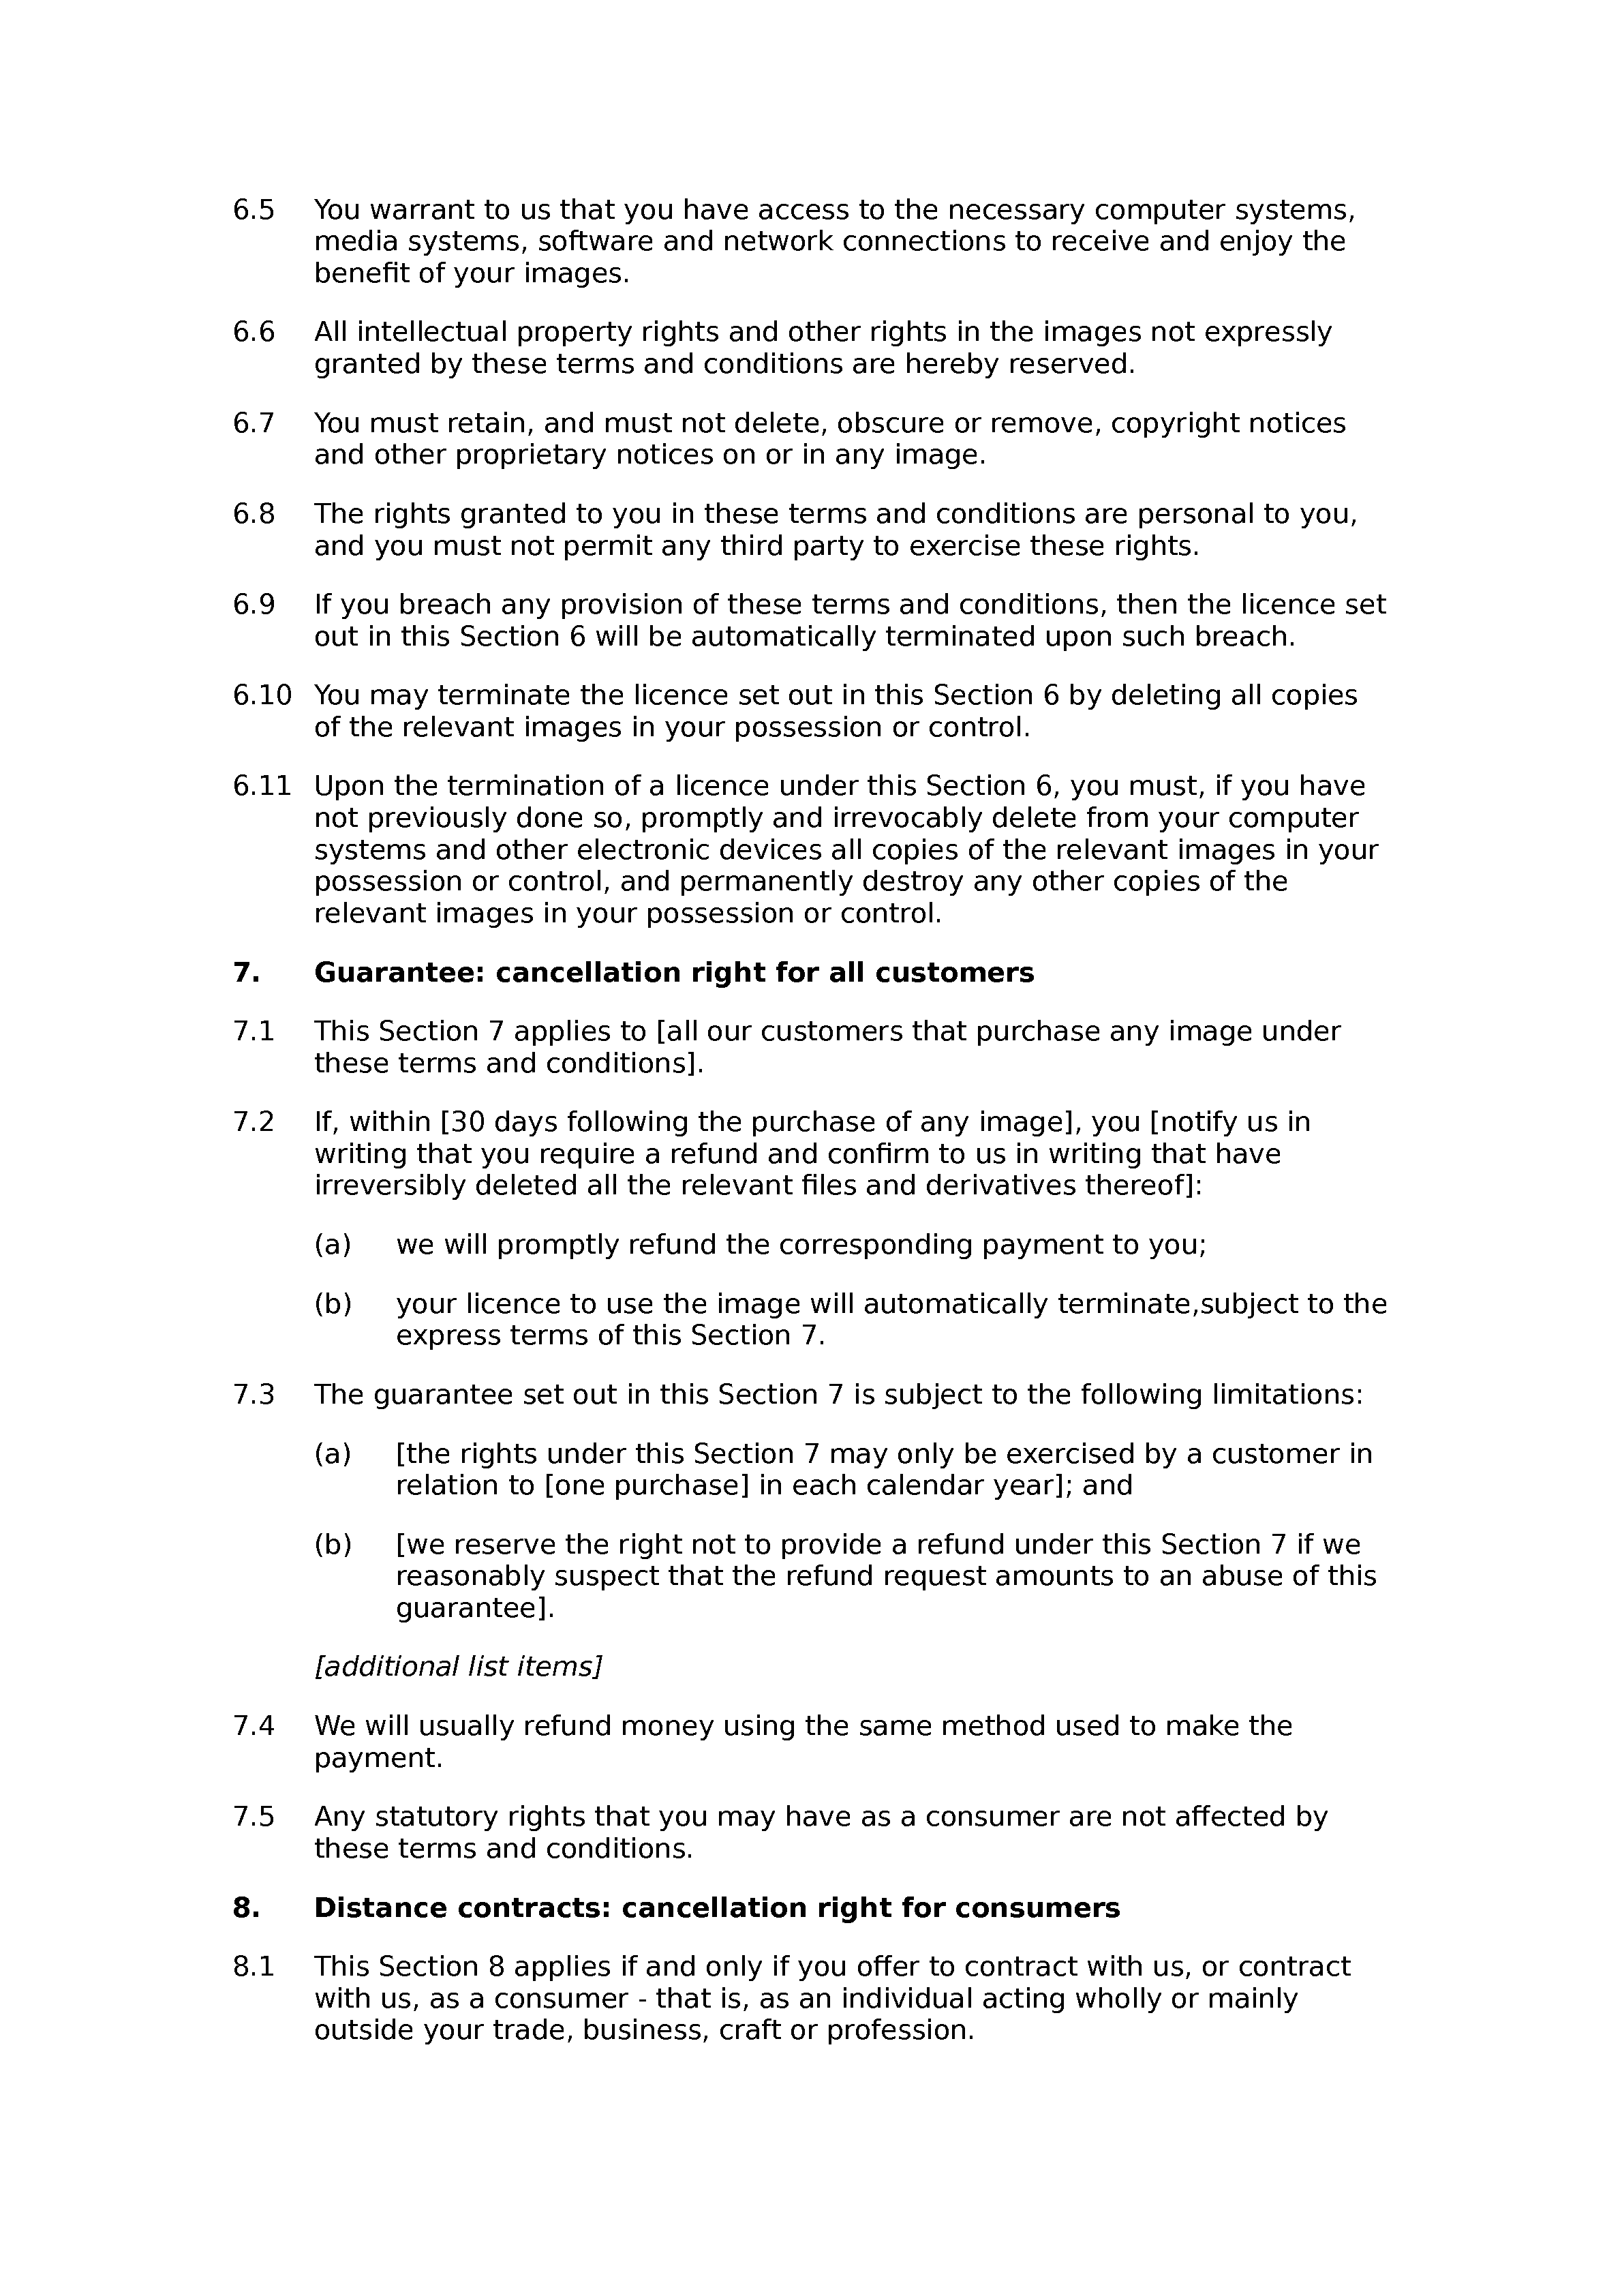 Image download terms and conditions document preview